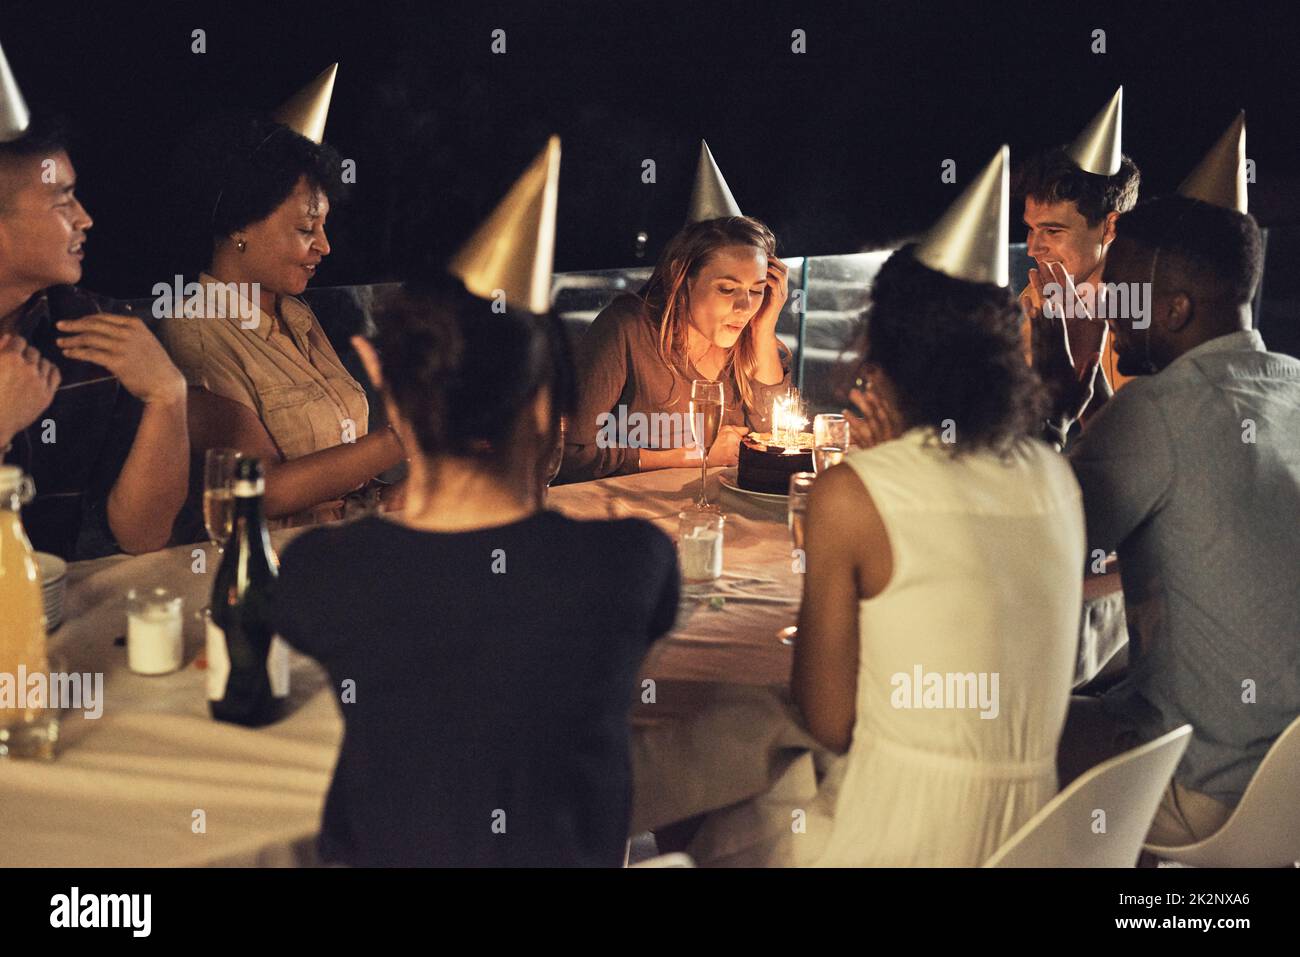 We hope all her wishes come true. Shot of a beautiful young woman blowing the candles on her birthday cake at a evening gathering with friends. Stock Photo